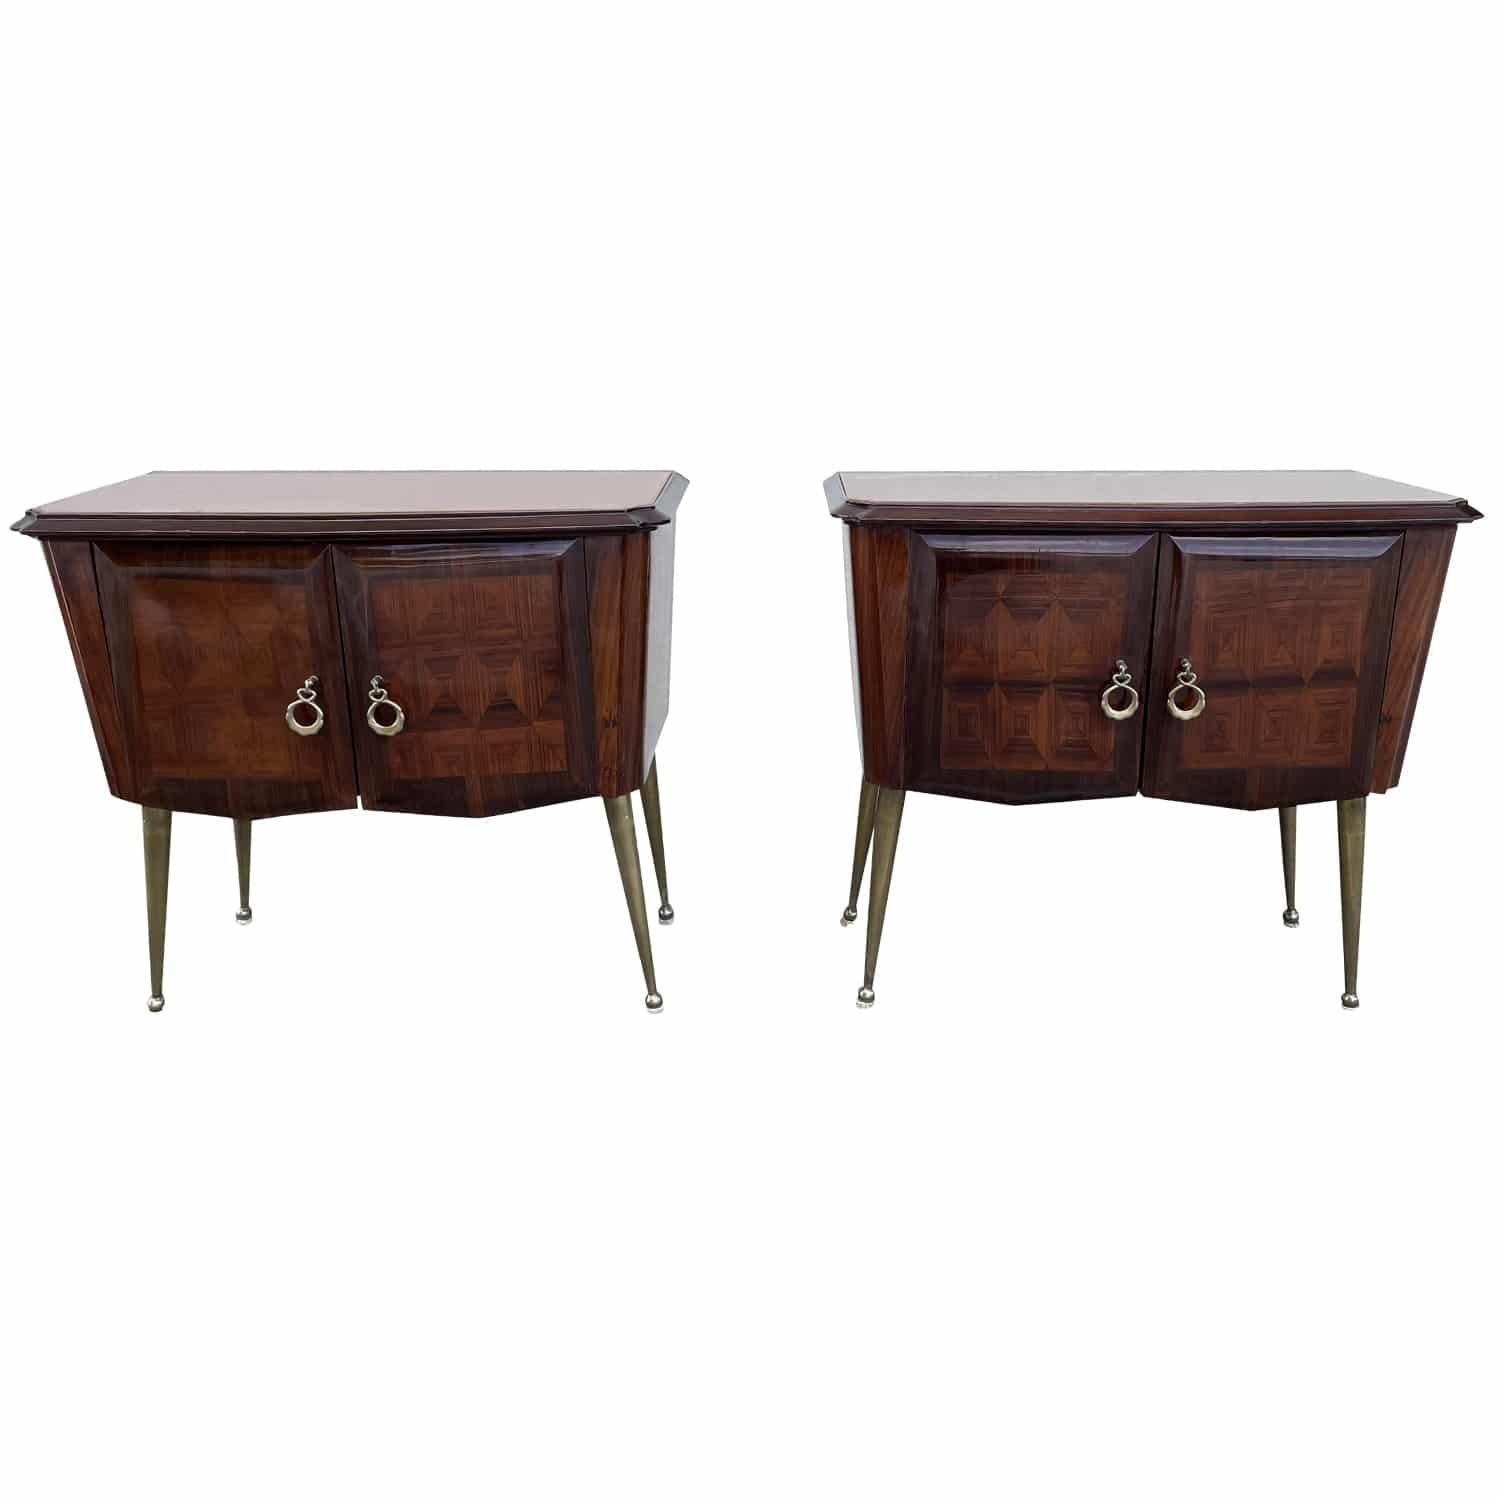 A dark-brown, vintage Mid-Century Modern Italian pair of nightstands, bedside tables made of hand crafted polished Rosewood with two small doors composed with detailed brass pulls, handles in good condition. The side tables are supported by four